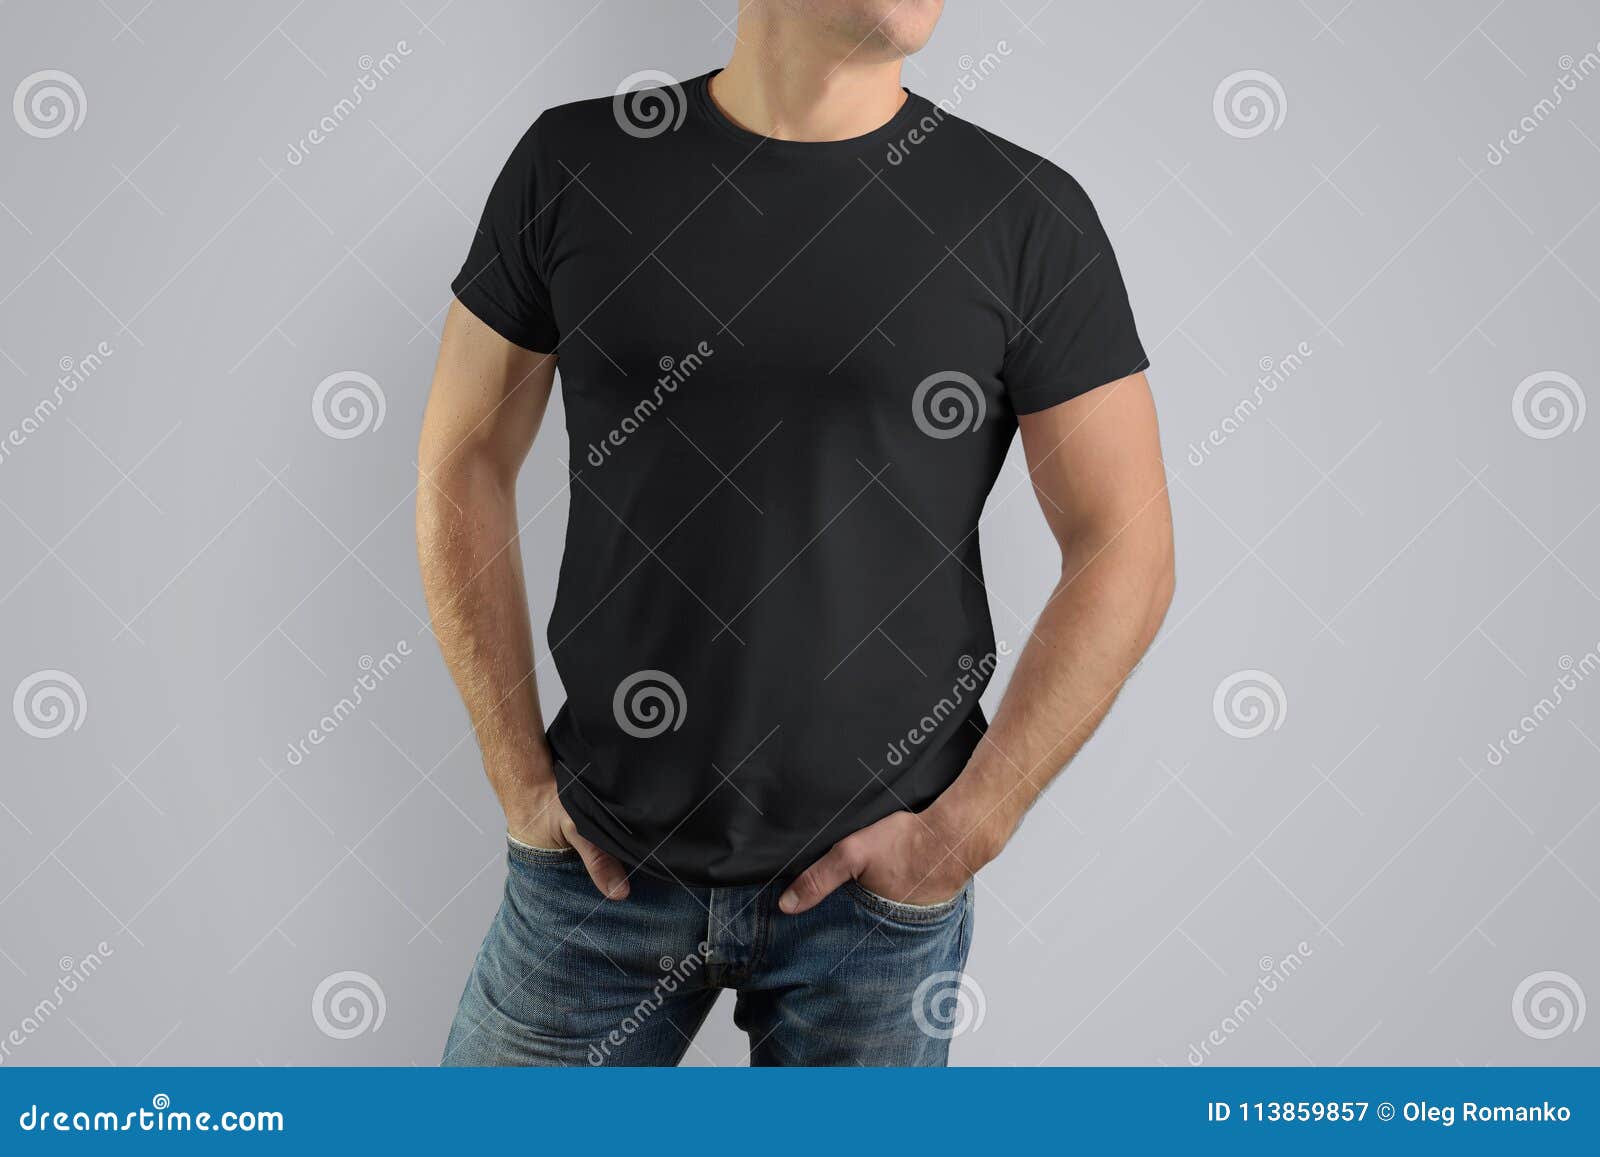 Download Mockup Black T-shirt On A Strong Man In Blue Jeans. Stock ...